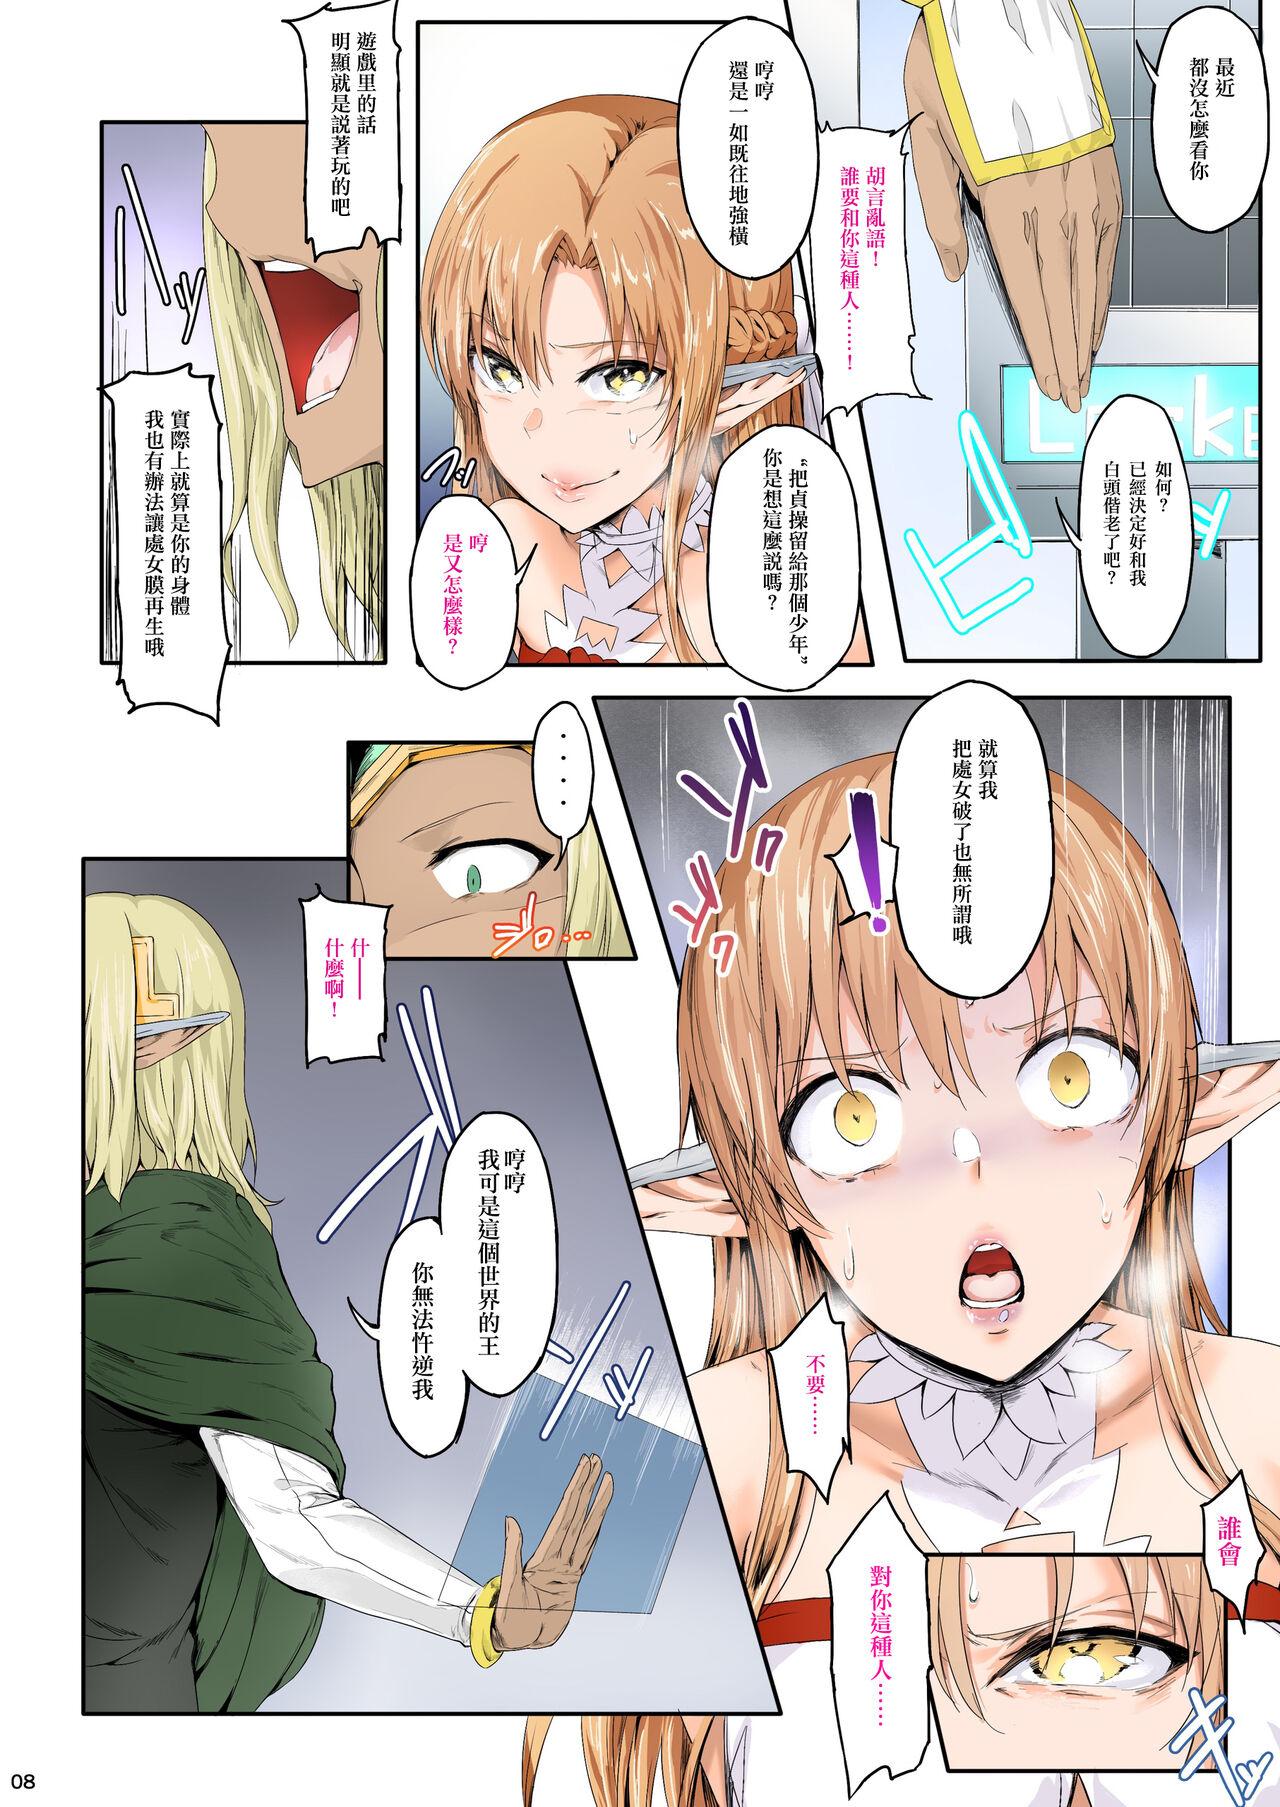 Reversecowgirl Asunama Soushuuhen Full color edition - Sword art online Skinny - Page 7